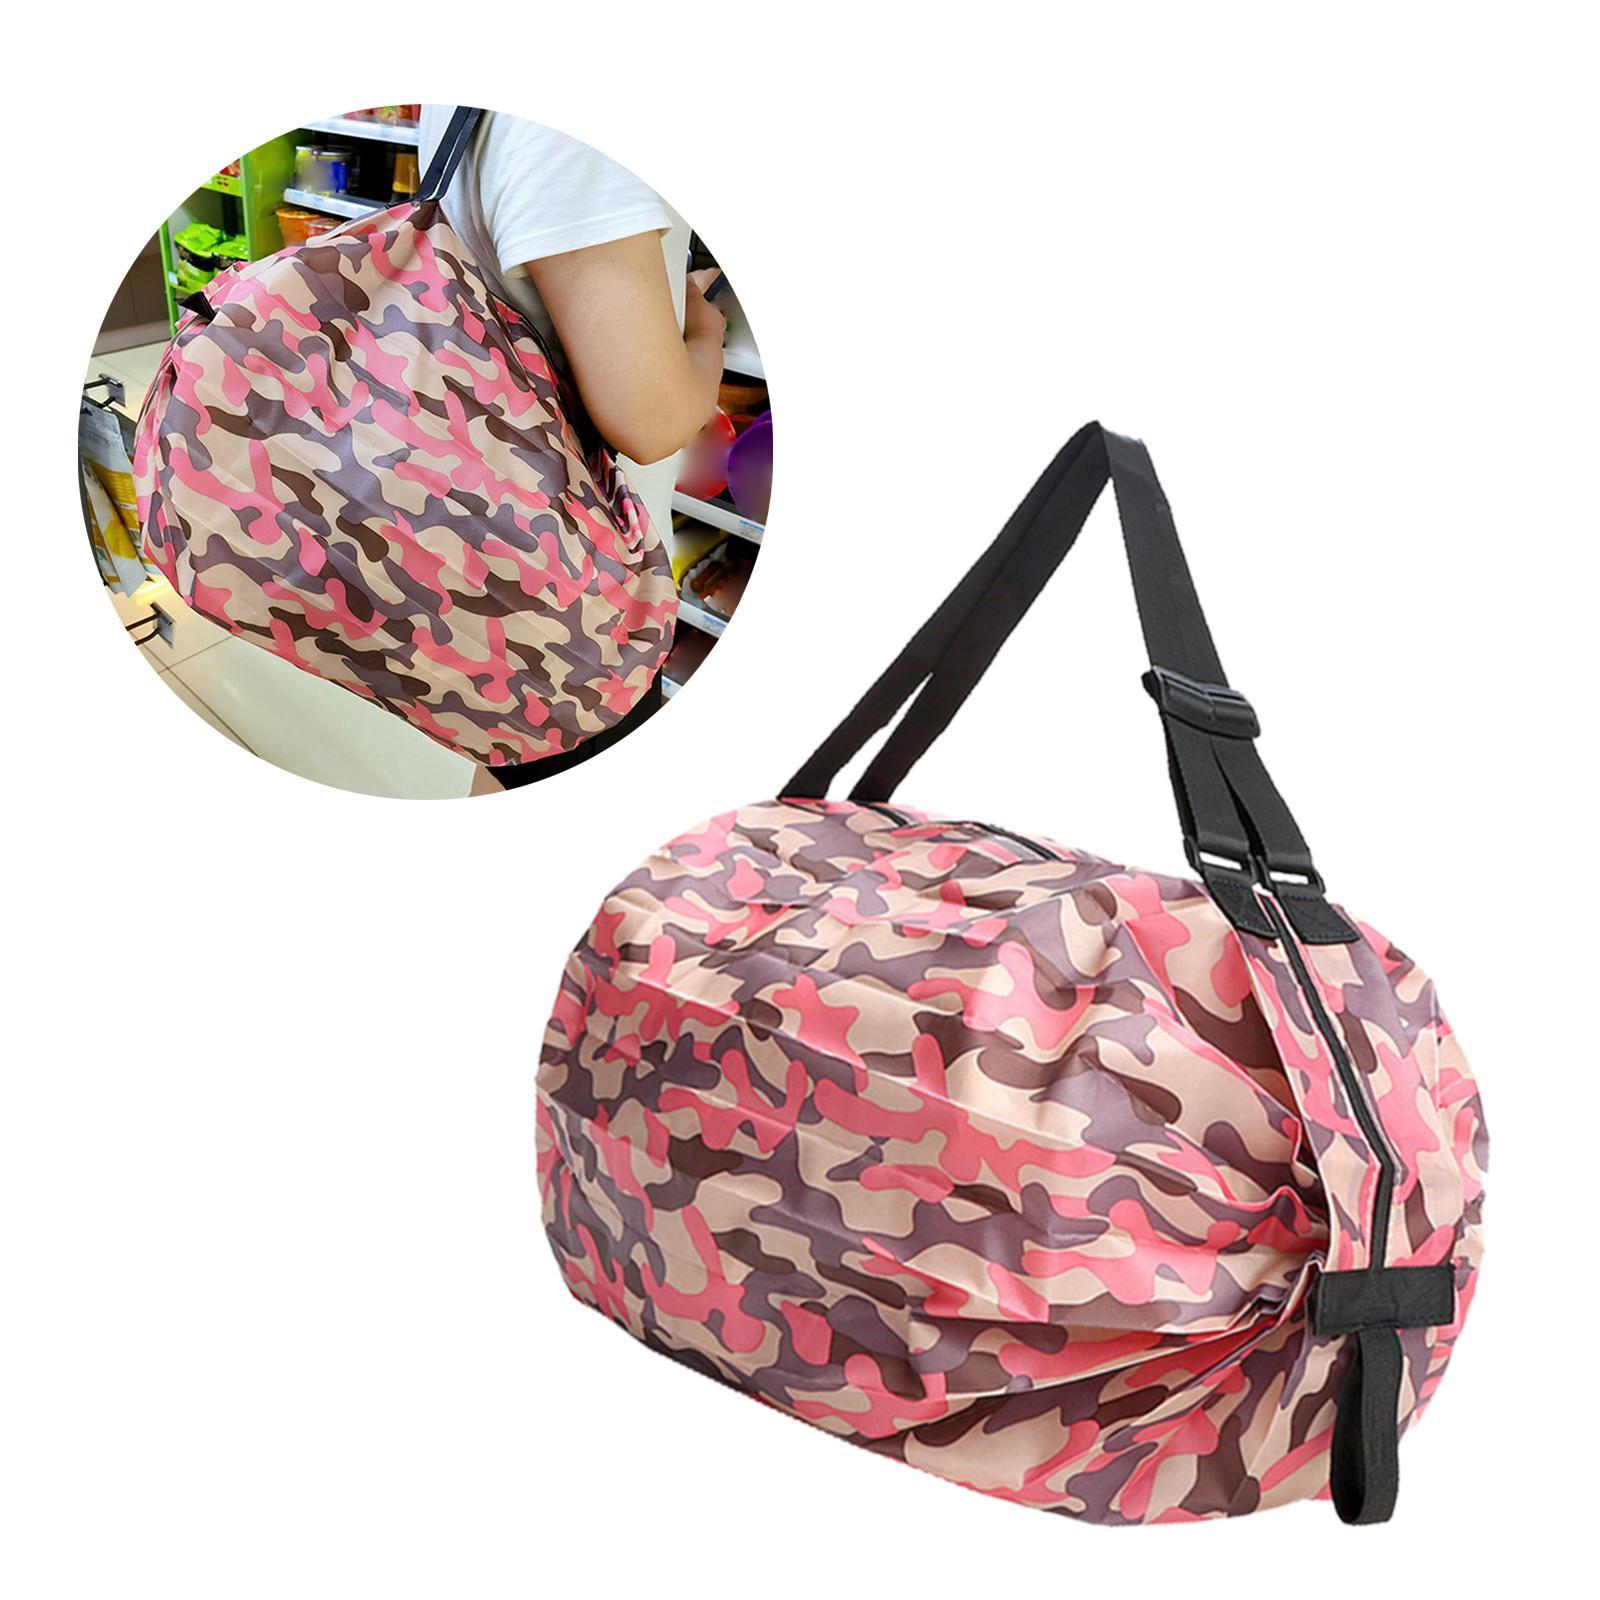 Shopping Bags Foldable Waterproof Grocery Bags Travel Storage Bag